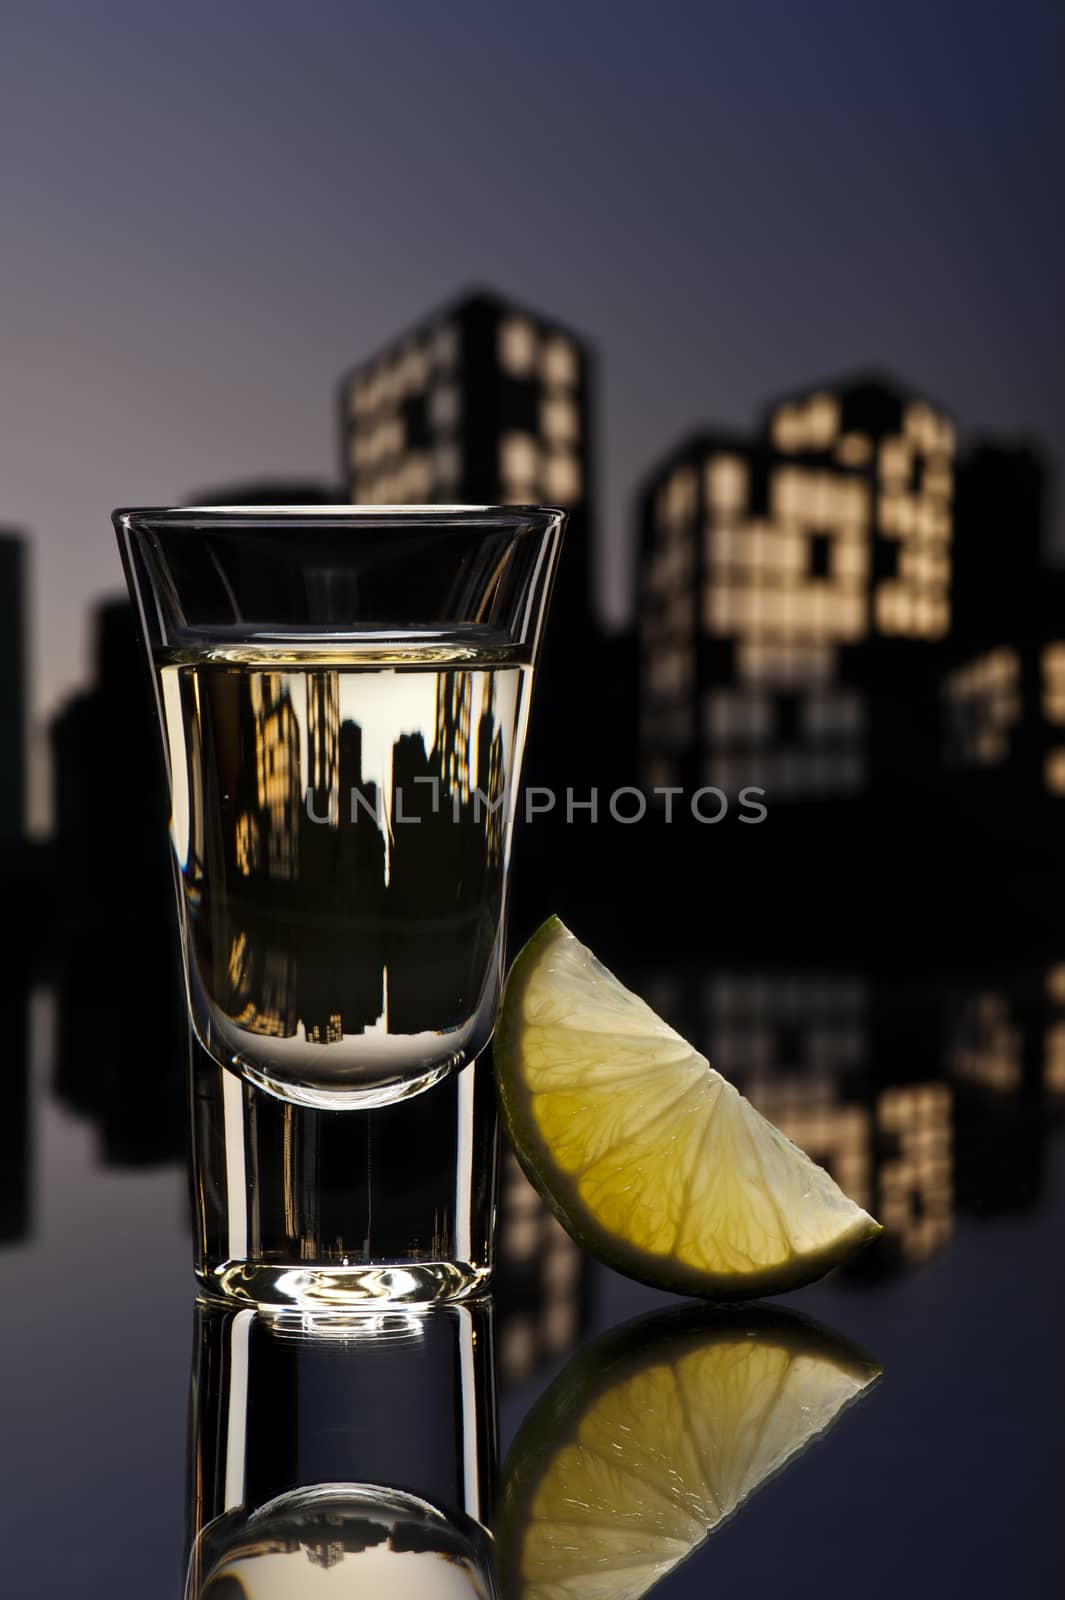 Tequila shoot in colorfull cityscape setting